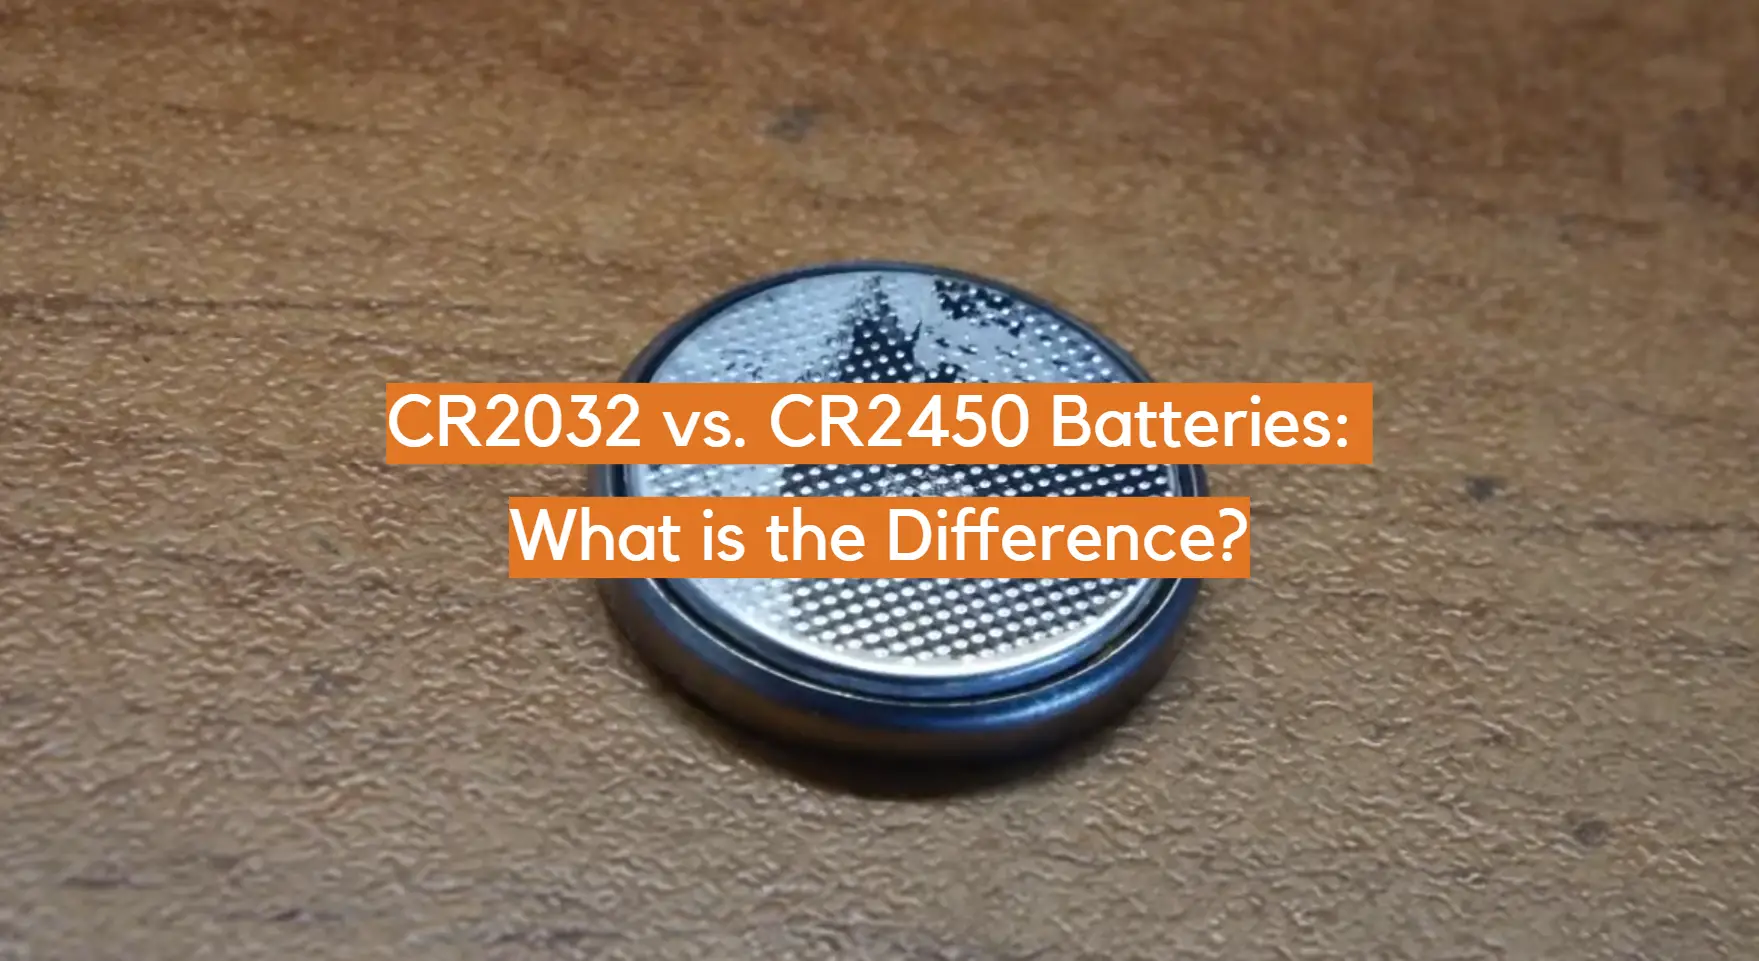 CR2450 vs. CR2032: Are they interchangeable?